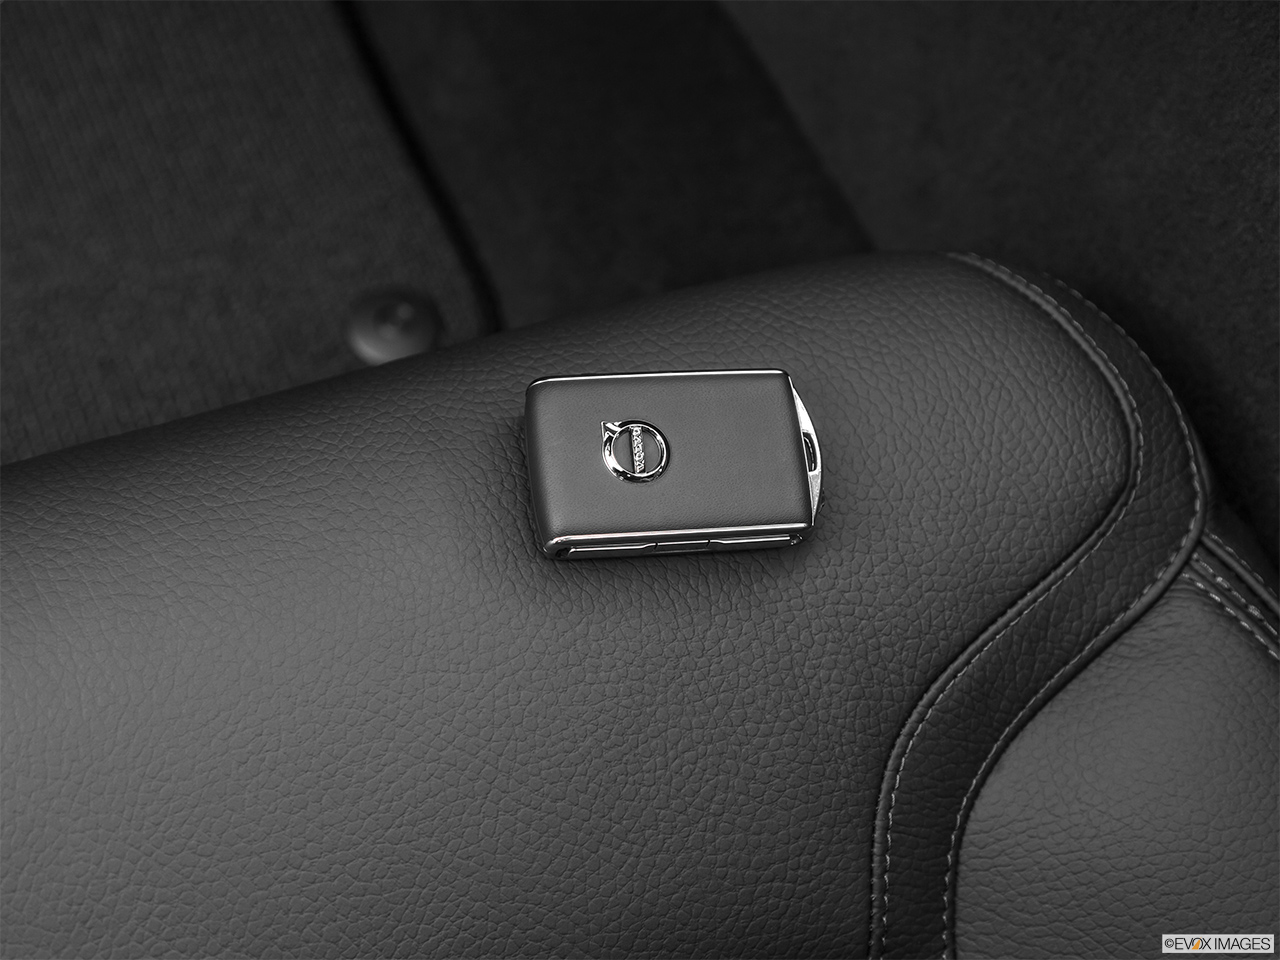 2020 Volvo V90 Cross Country T6 AWD Key fob on driver's seat. 